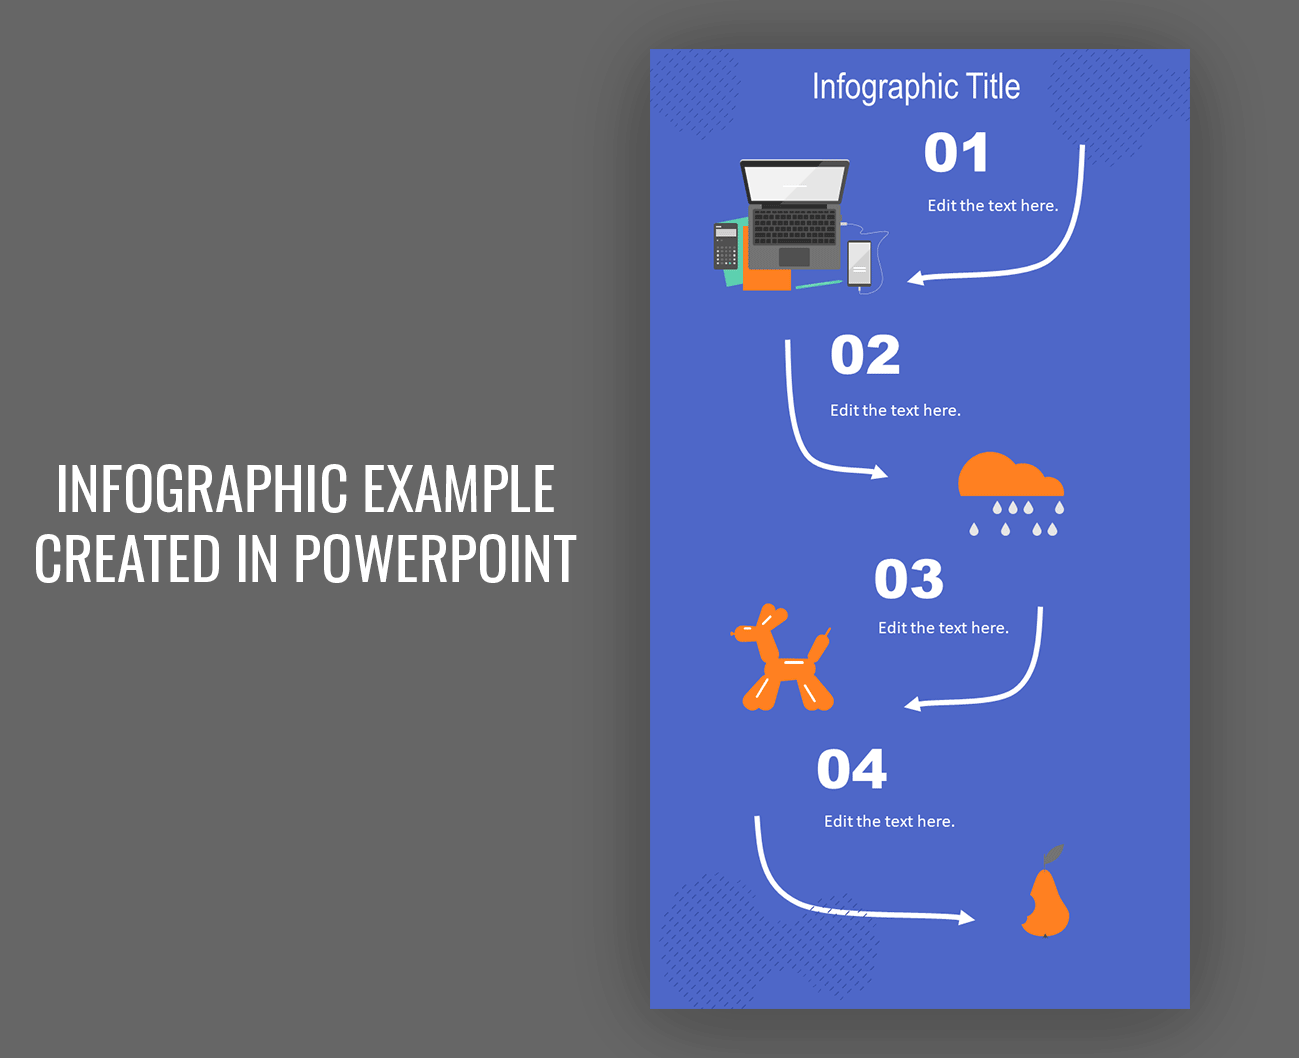 Example of Infographic created on PowerPoint